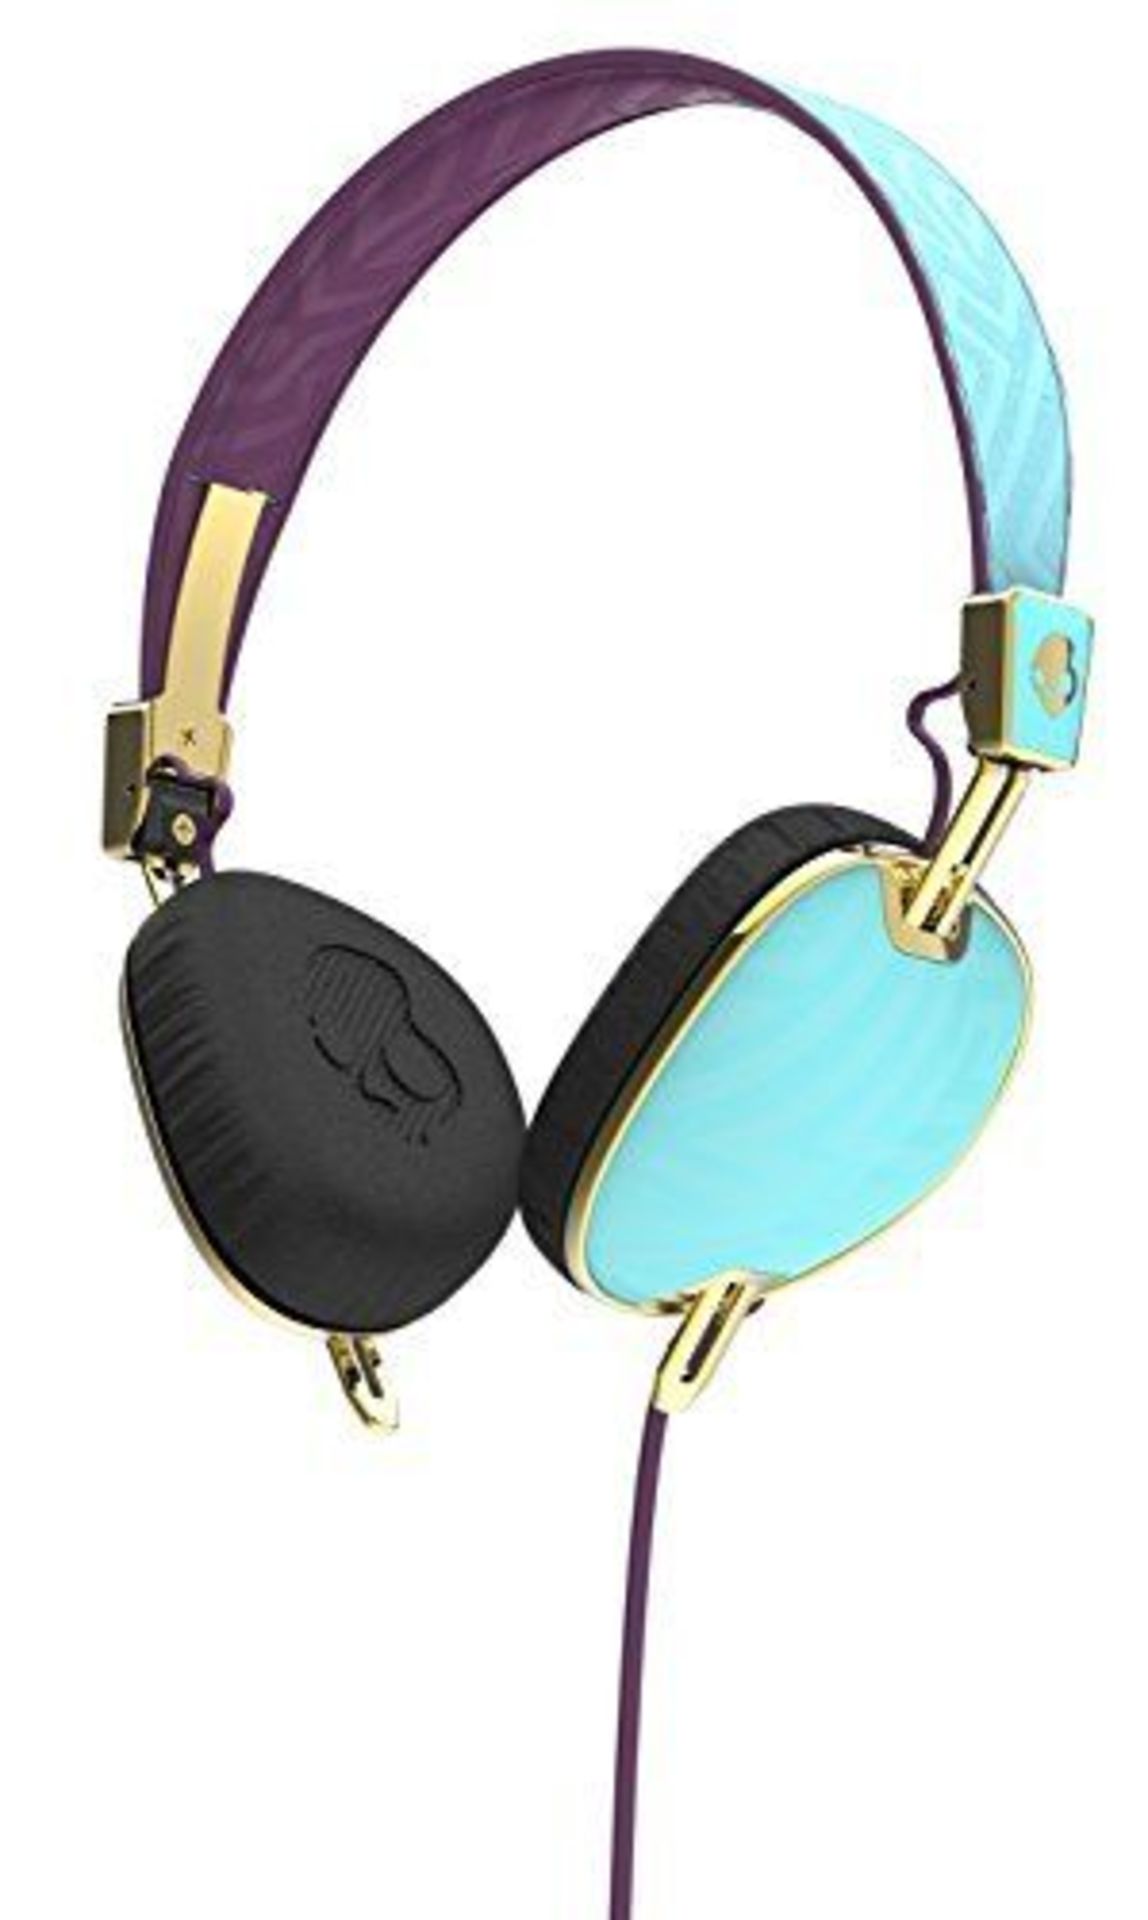 V *TRADE QTY* Brand New Skullcandy Knockout On-Ear Headphones with Three Button Mic/Controller -